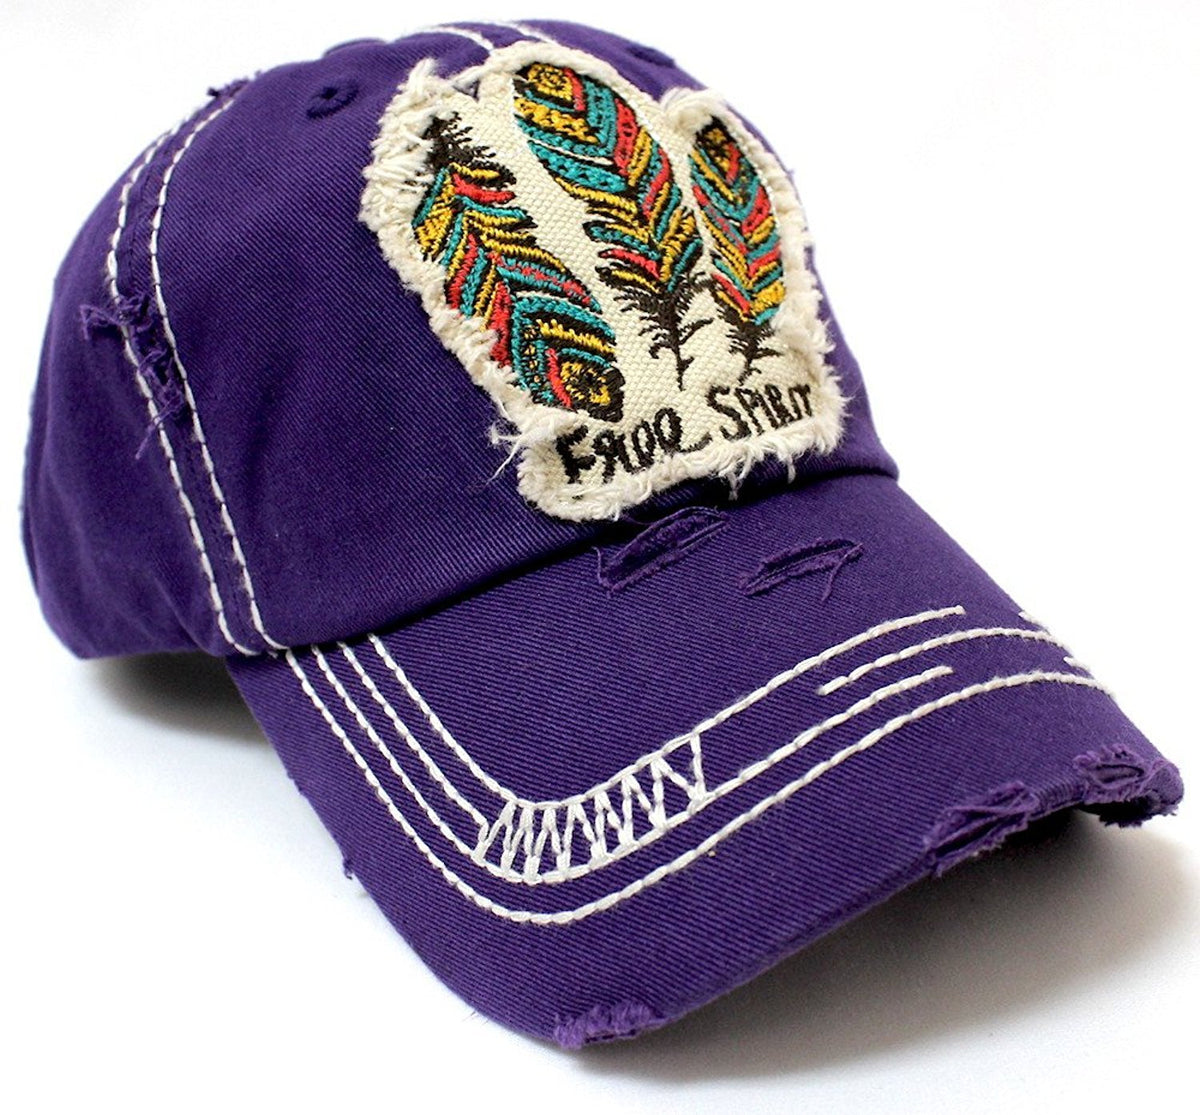 Triple Feather "Free Spirit" Patch Embroidery Hat - Caps 'N Vintage 